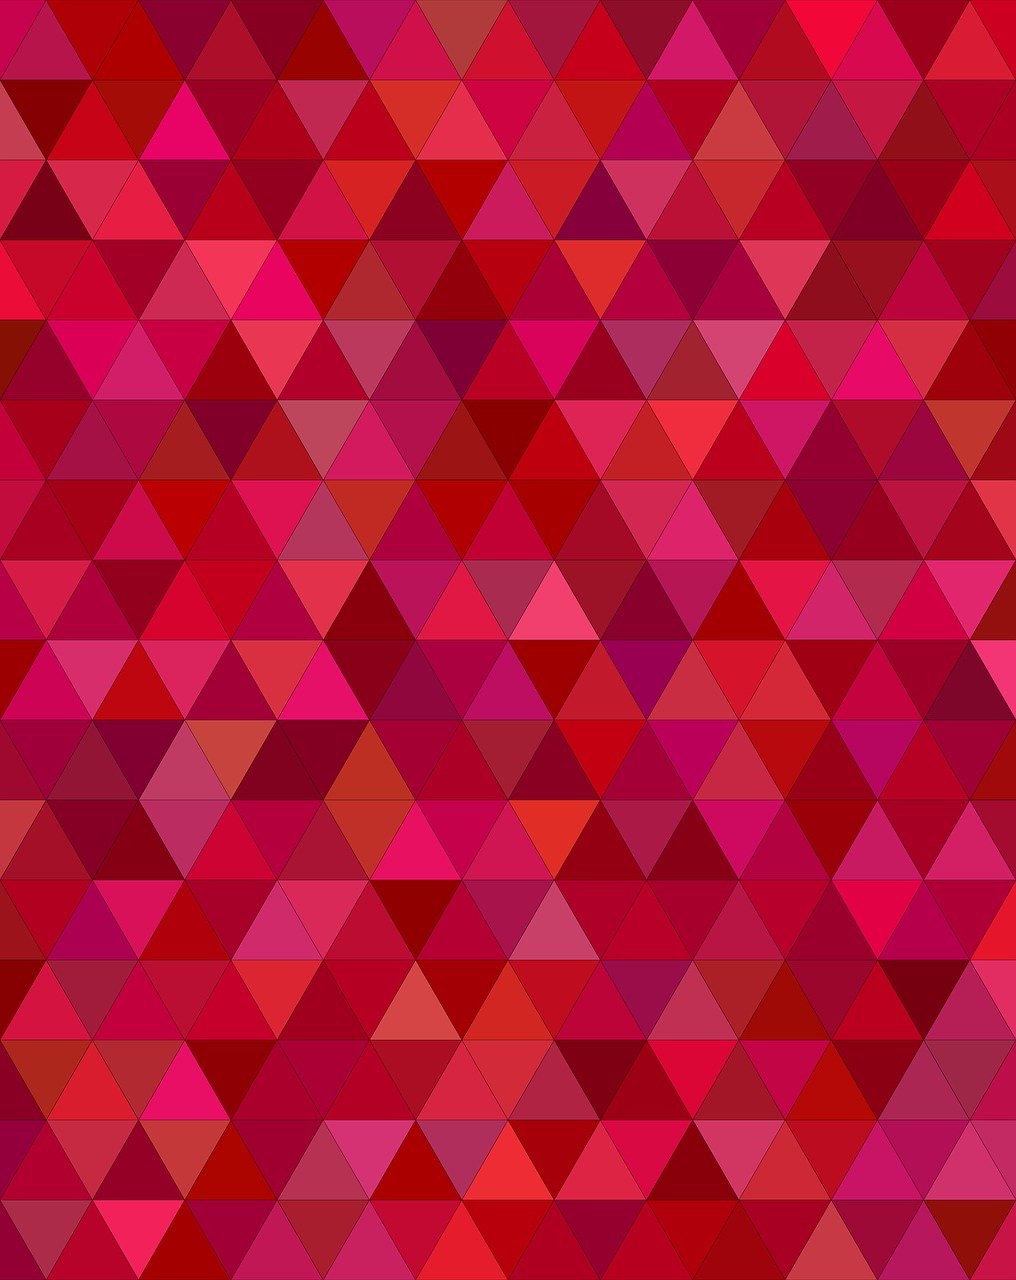 a geometric pattern of red and pink colors, by Emma Geary, pixabay, geometric abstract art, intricate triangular designs, solid background color, multicolored vector art, low polygons illustration